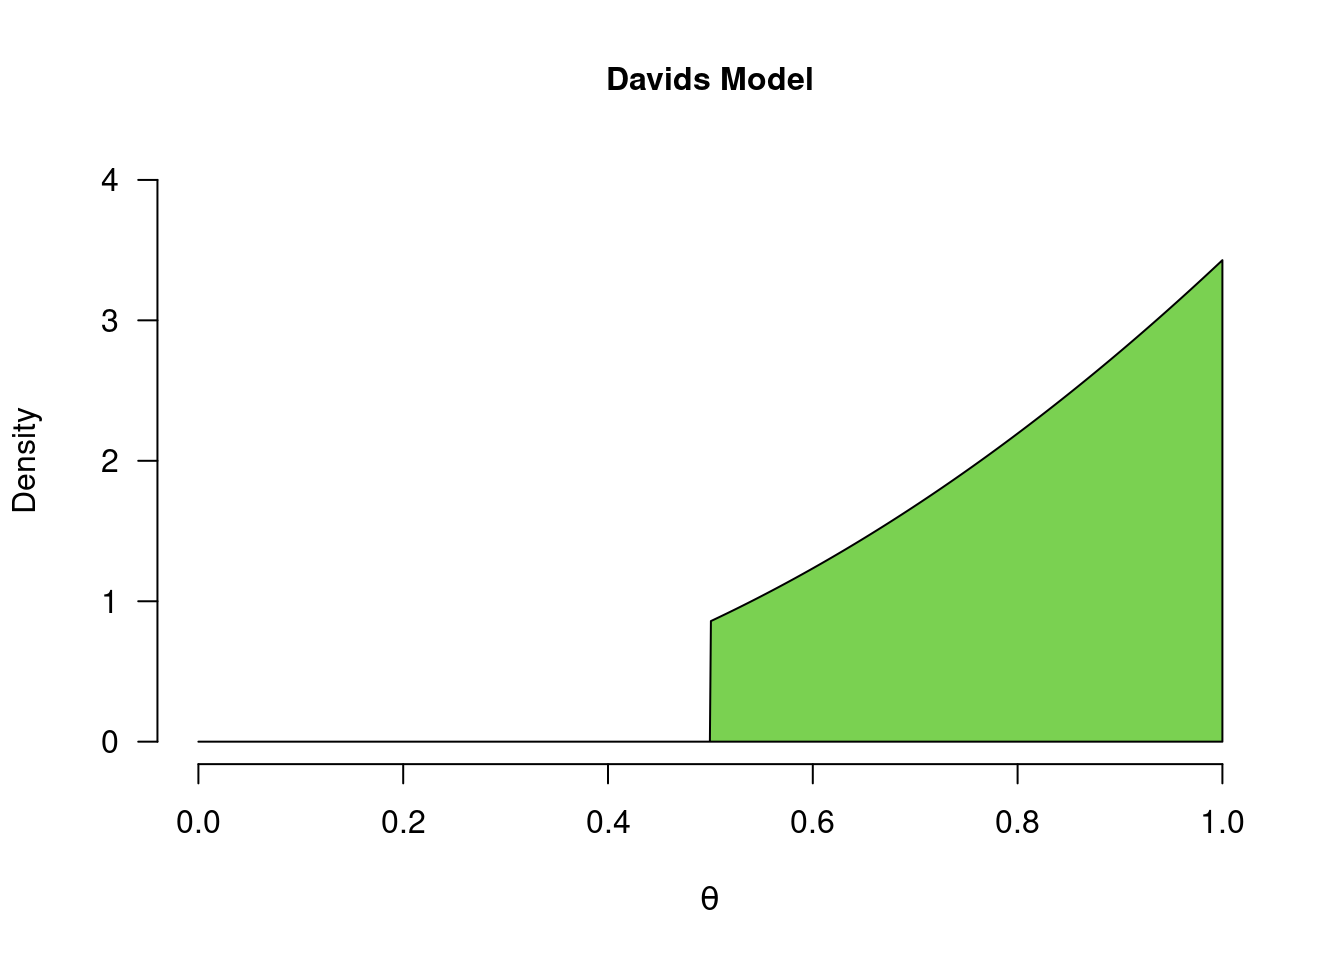 David's model for a coin toss. David believes that only values between 0.5 and 1 are possible, and that values closer to 1 are more plausible, a priori. When certain ranges of values have their density set to 0, we refer to the distribution as a *truncated distribution*.